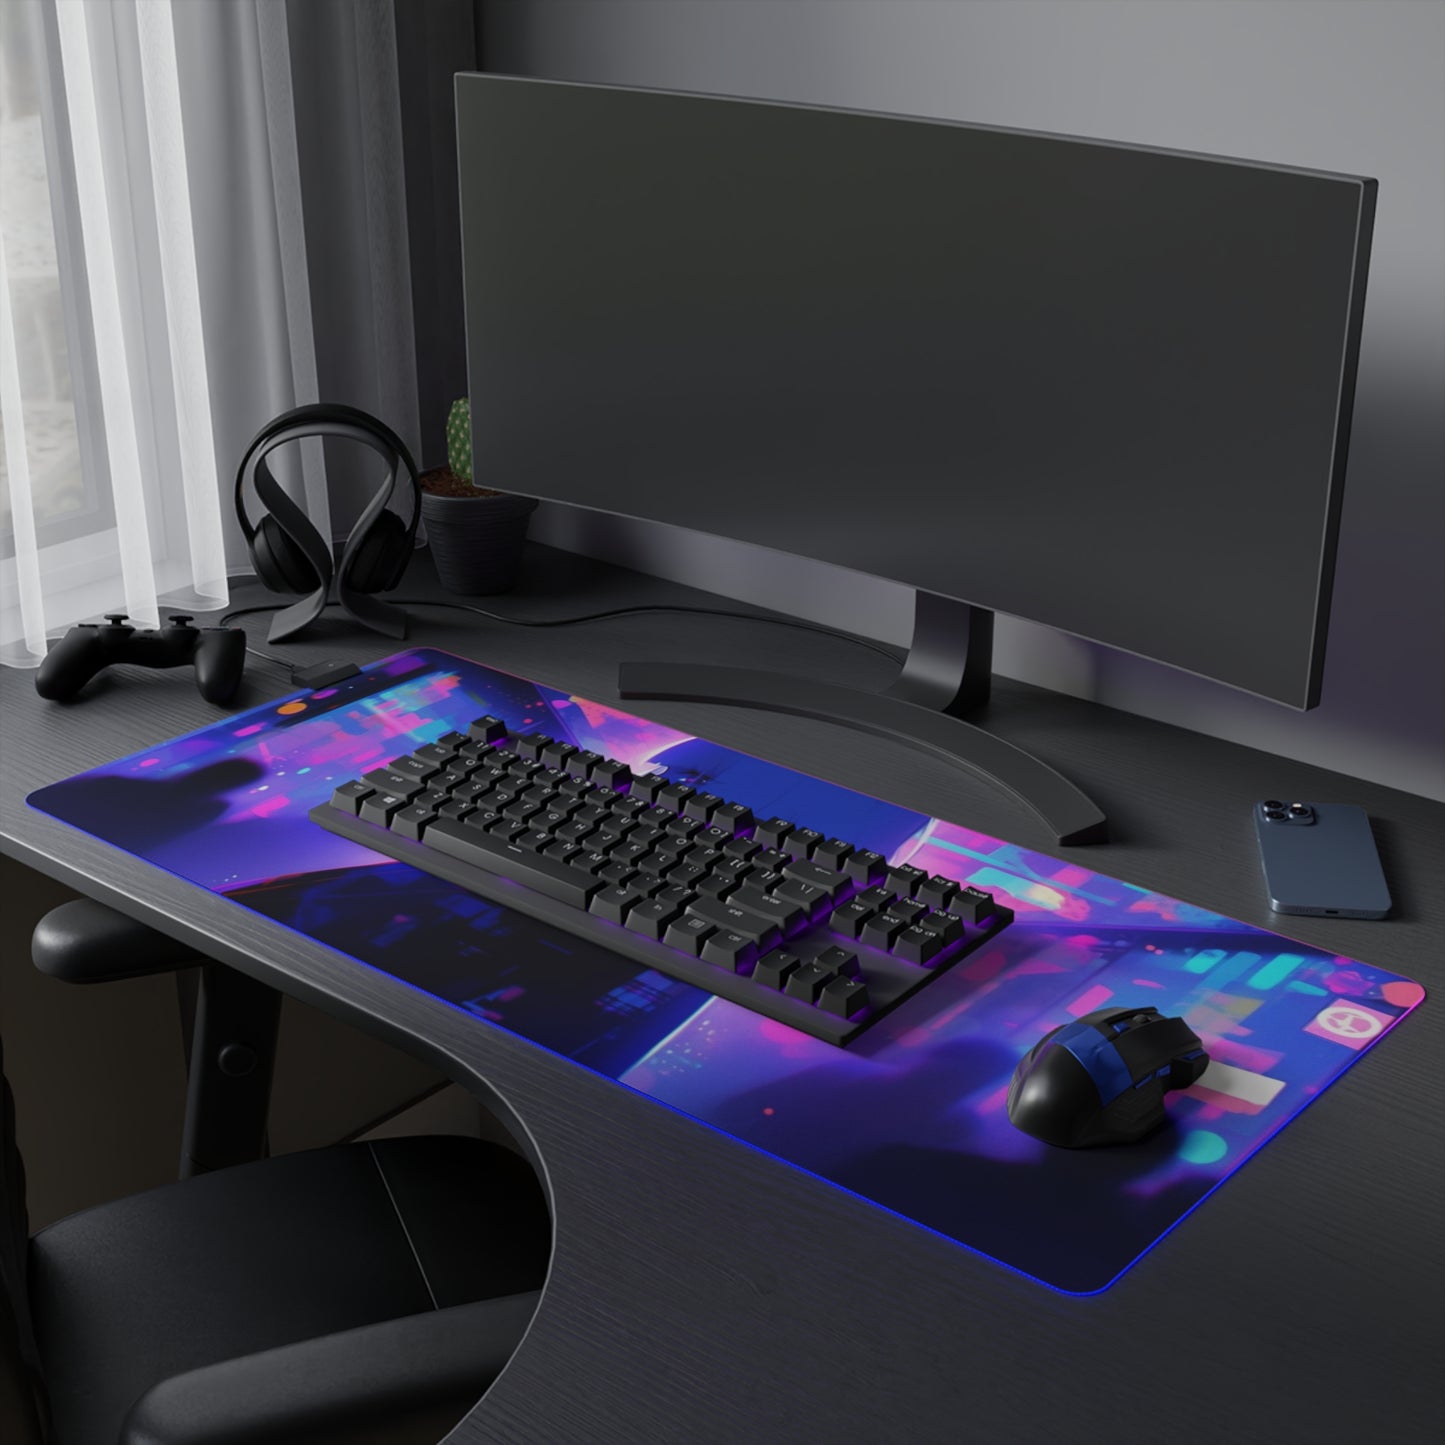 Neon Whispers LED Gaming Mouse Pad